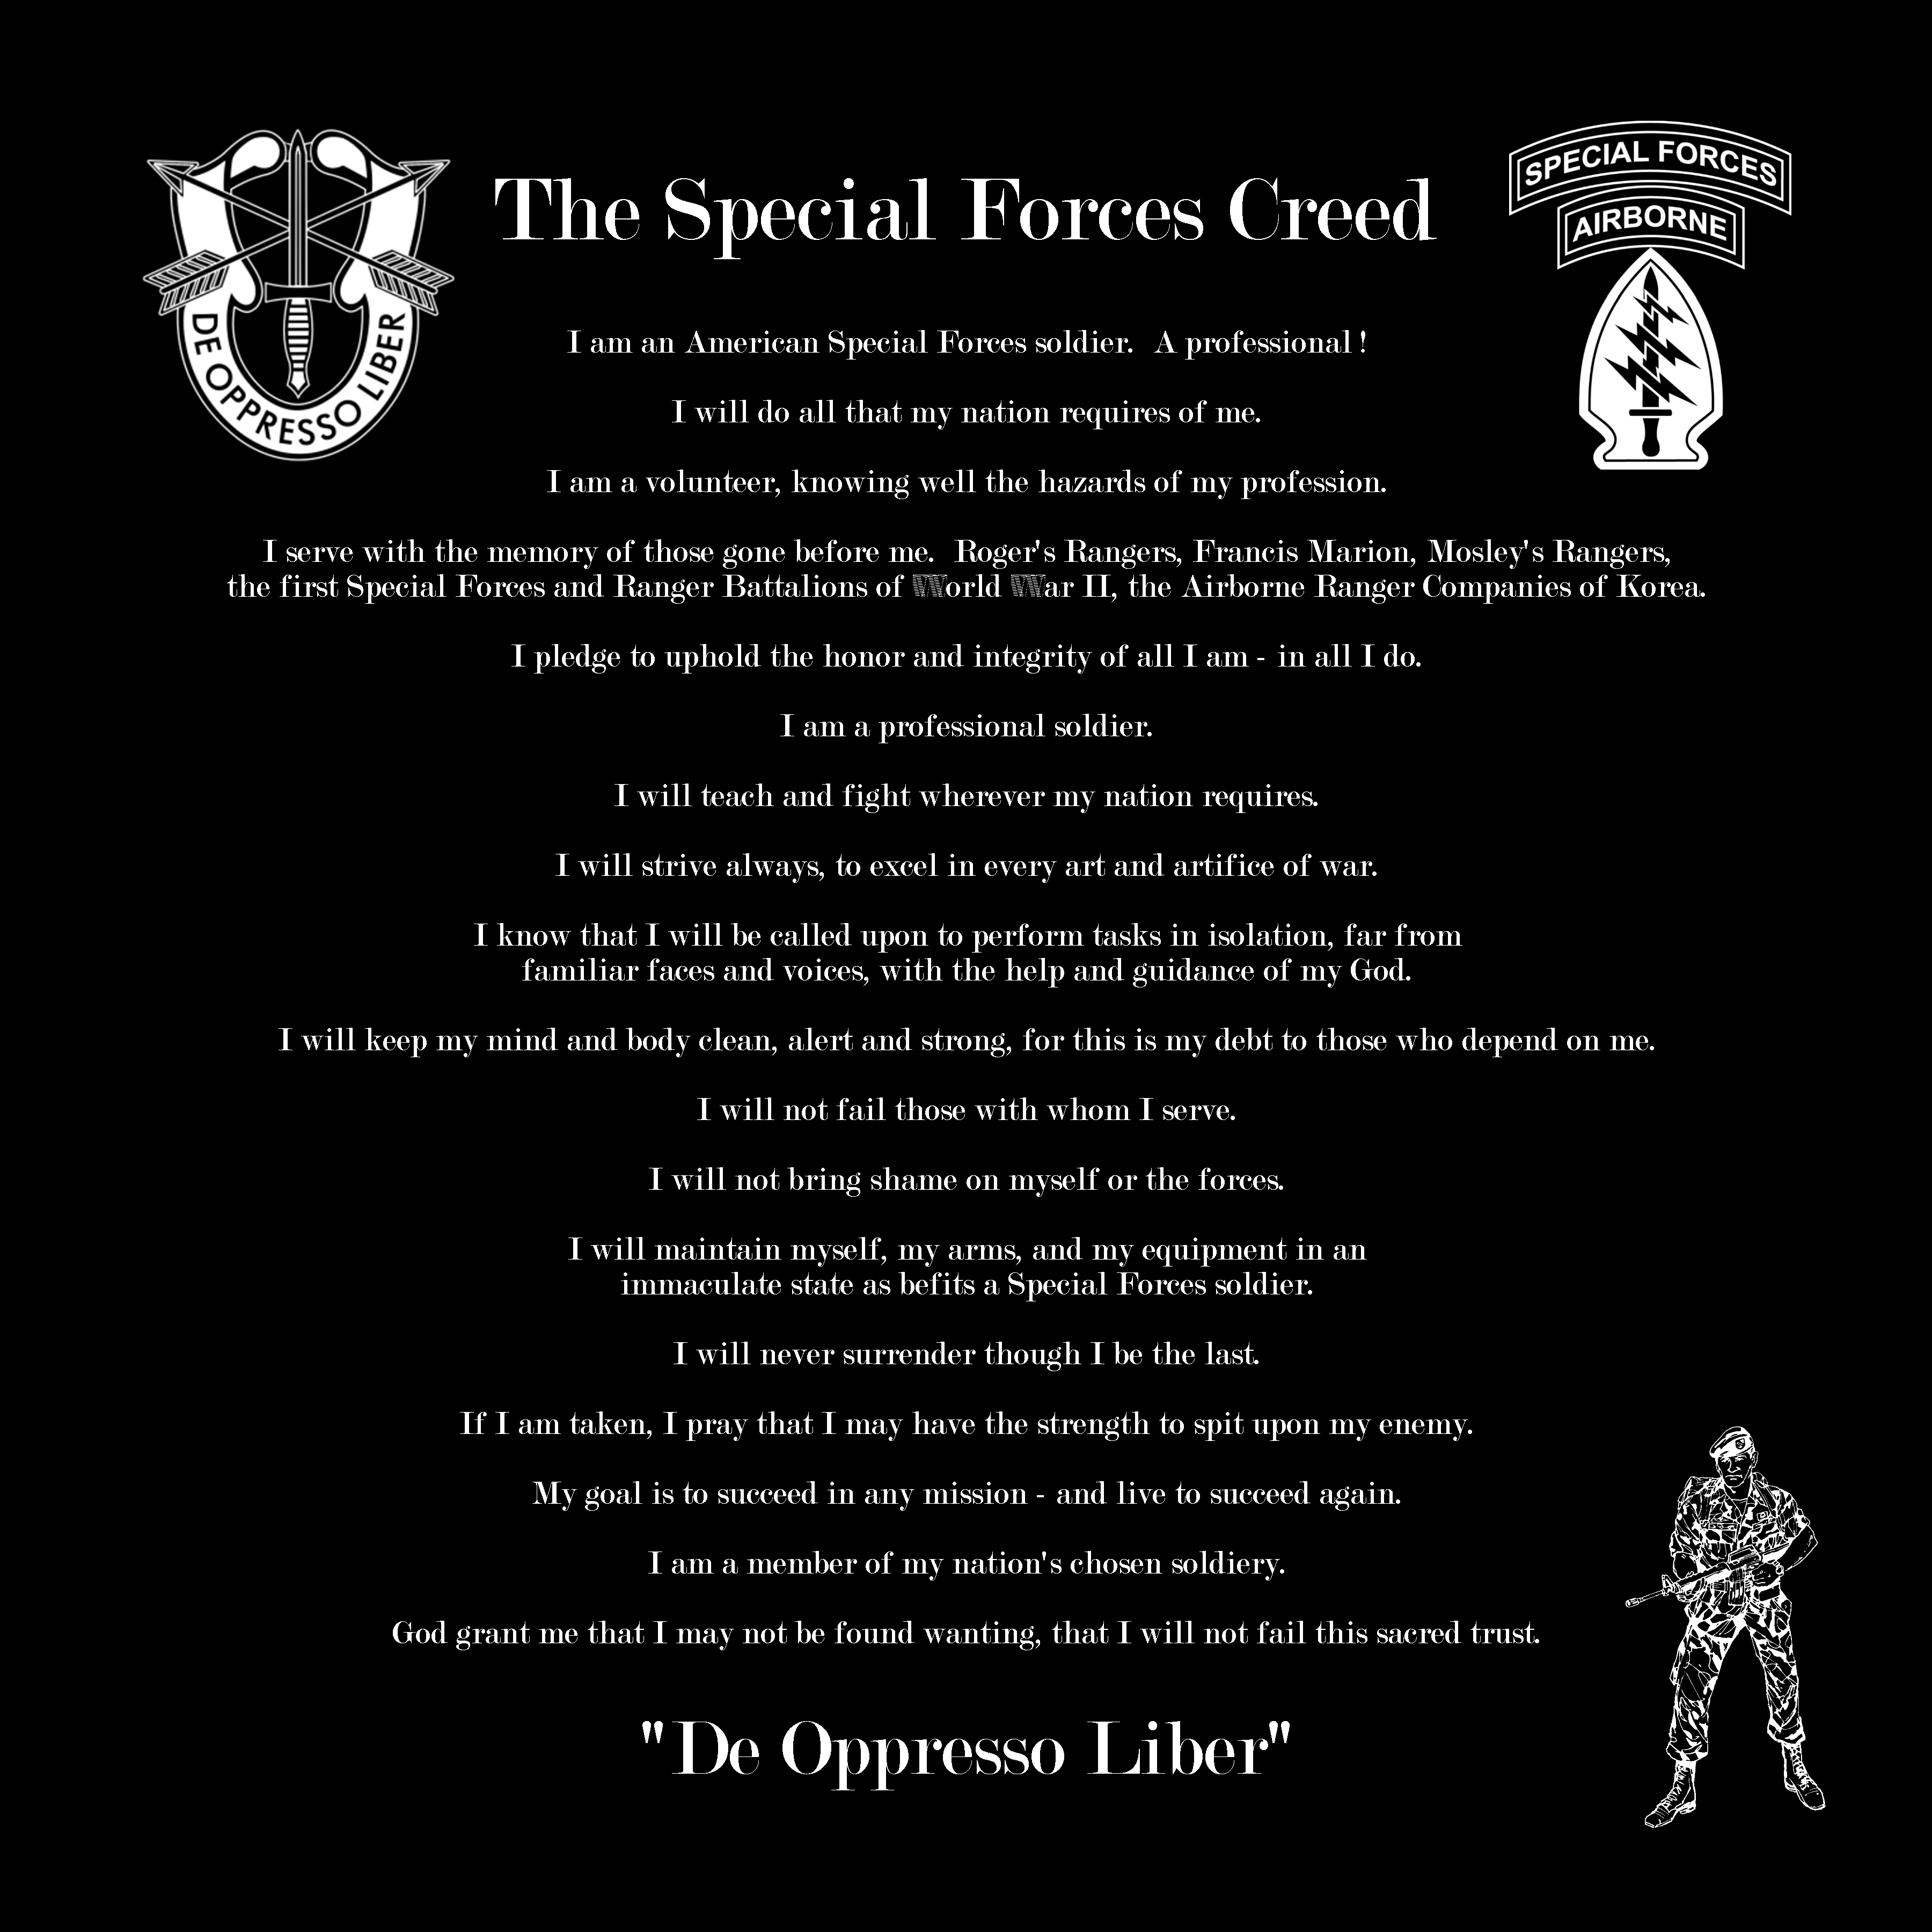 Soldier S Creed Image Thecelebritypix